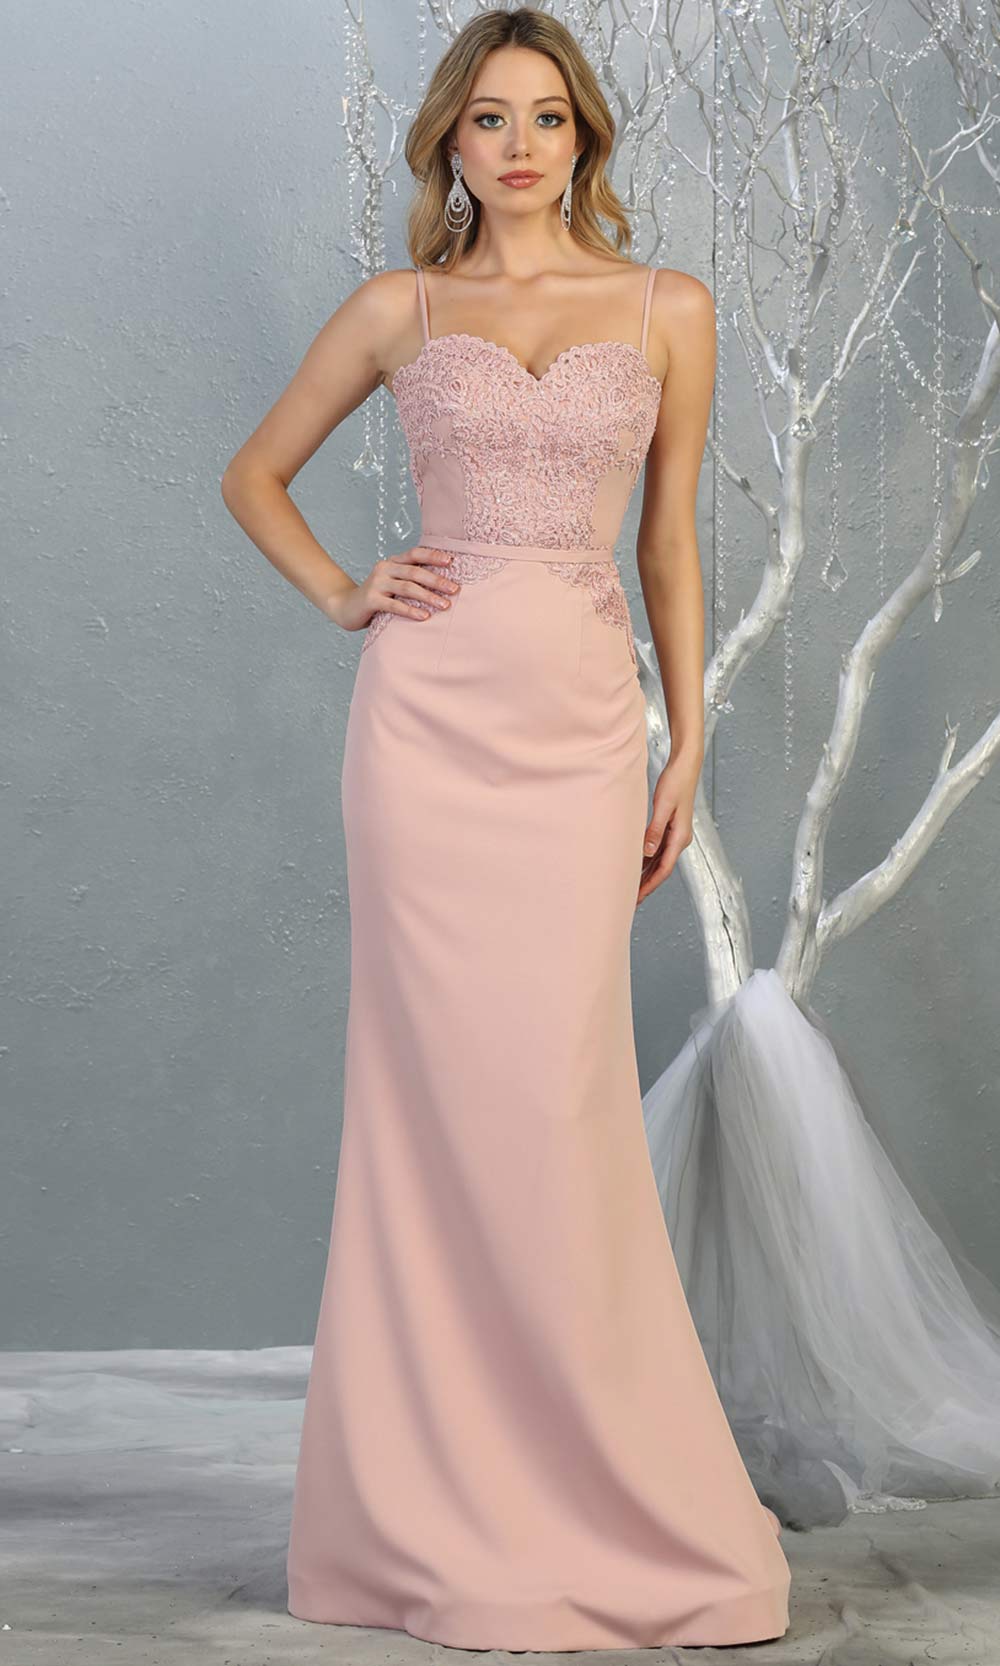 Mayqueen MQ1759 long dusty rose lace top evening fitted dress w/straps. Full length light pink gown is perfect for bridesmaids, enagagement/e-shoot dress, wedding guest dress, indowestern gown, formal evening party dress, prom. Plus sizes avail.jpg